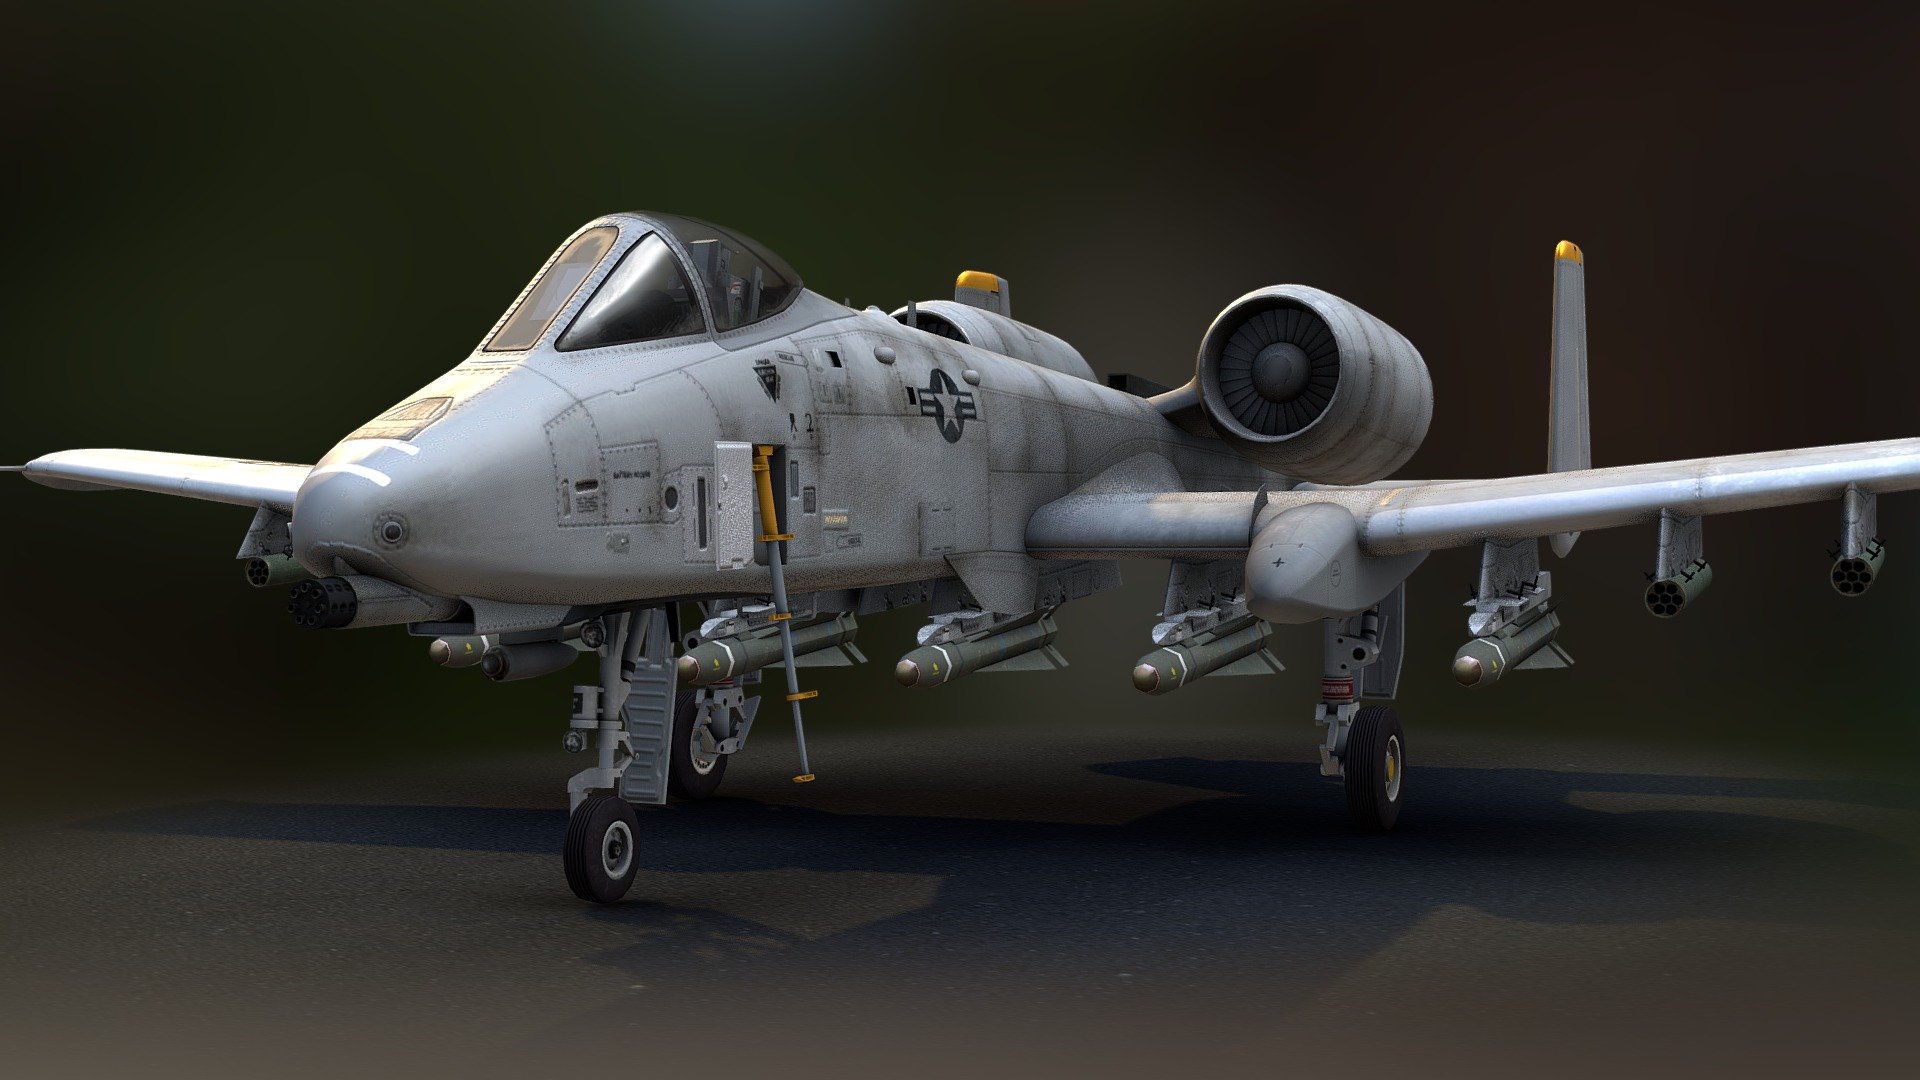 I modelled this plane for original Arma, but I think it was also used in Arma2 and VBS2. Made sometime around 2005/6.

P.S.: No, unfortunatly you can't buy this model. It was made for Bohemia Interactive and I don't have the rights to sell it 3d model